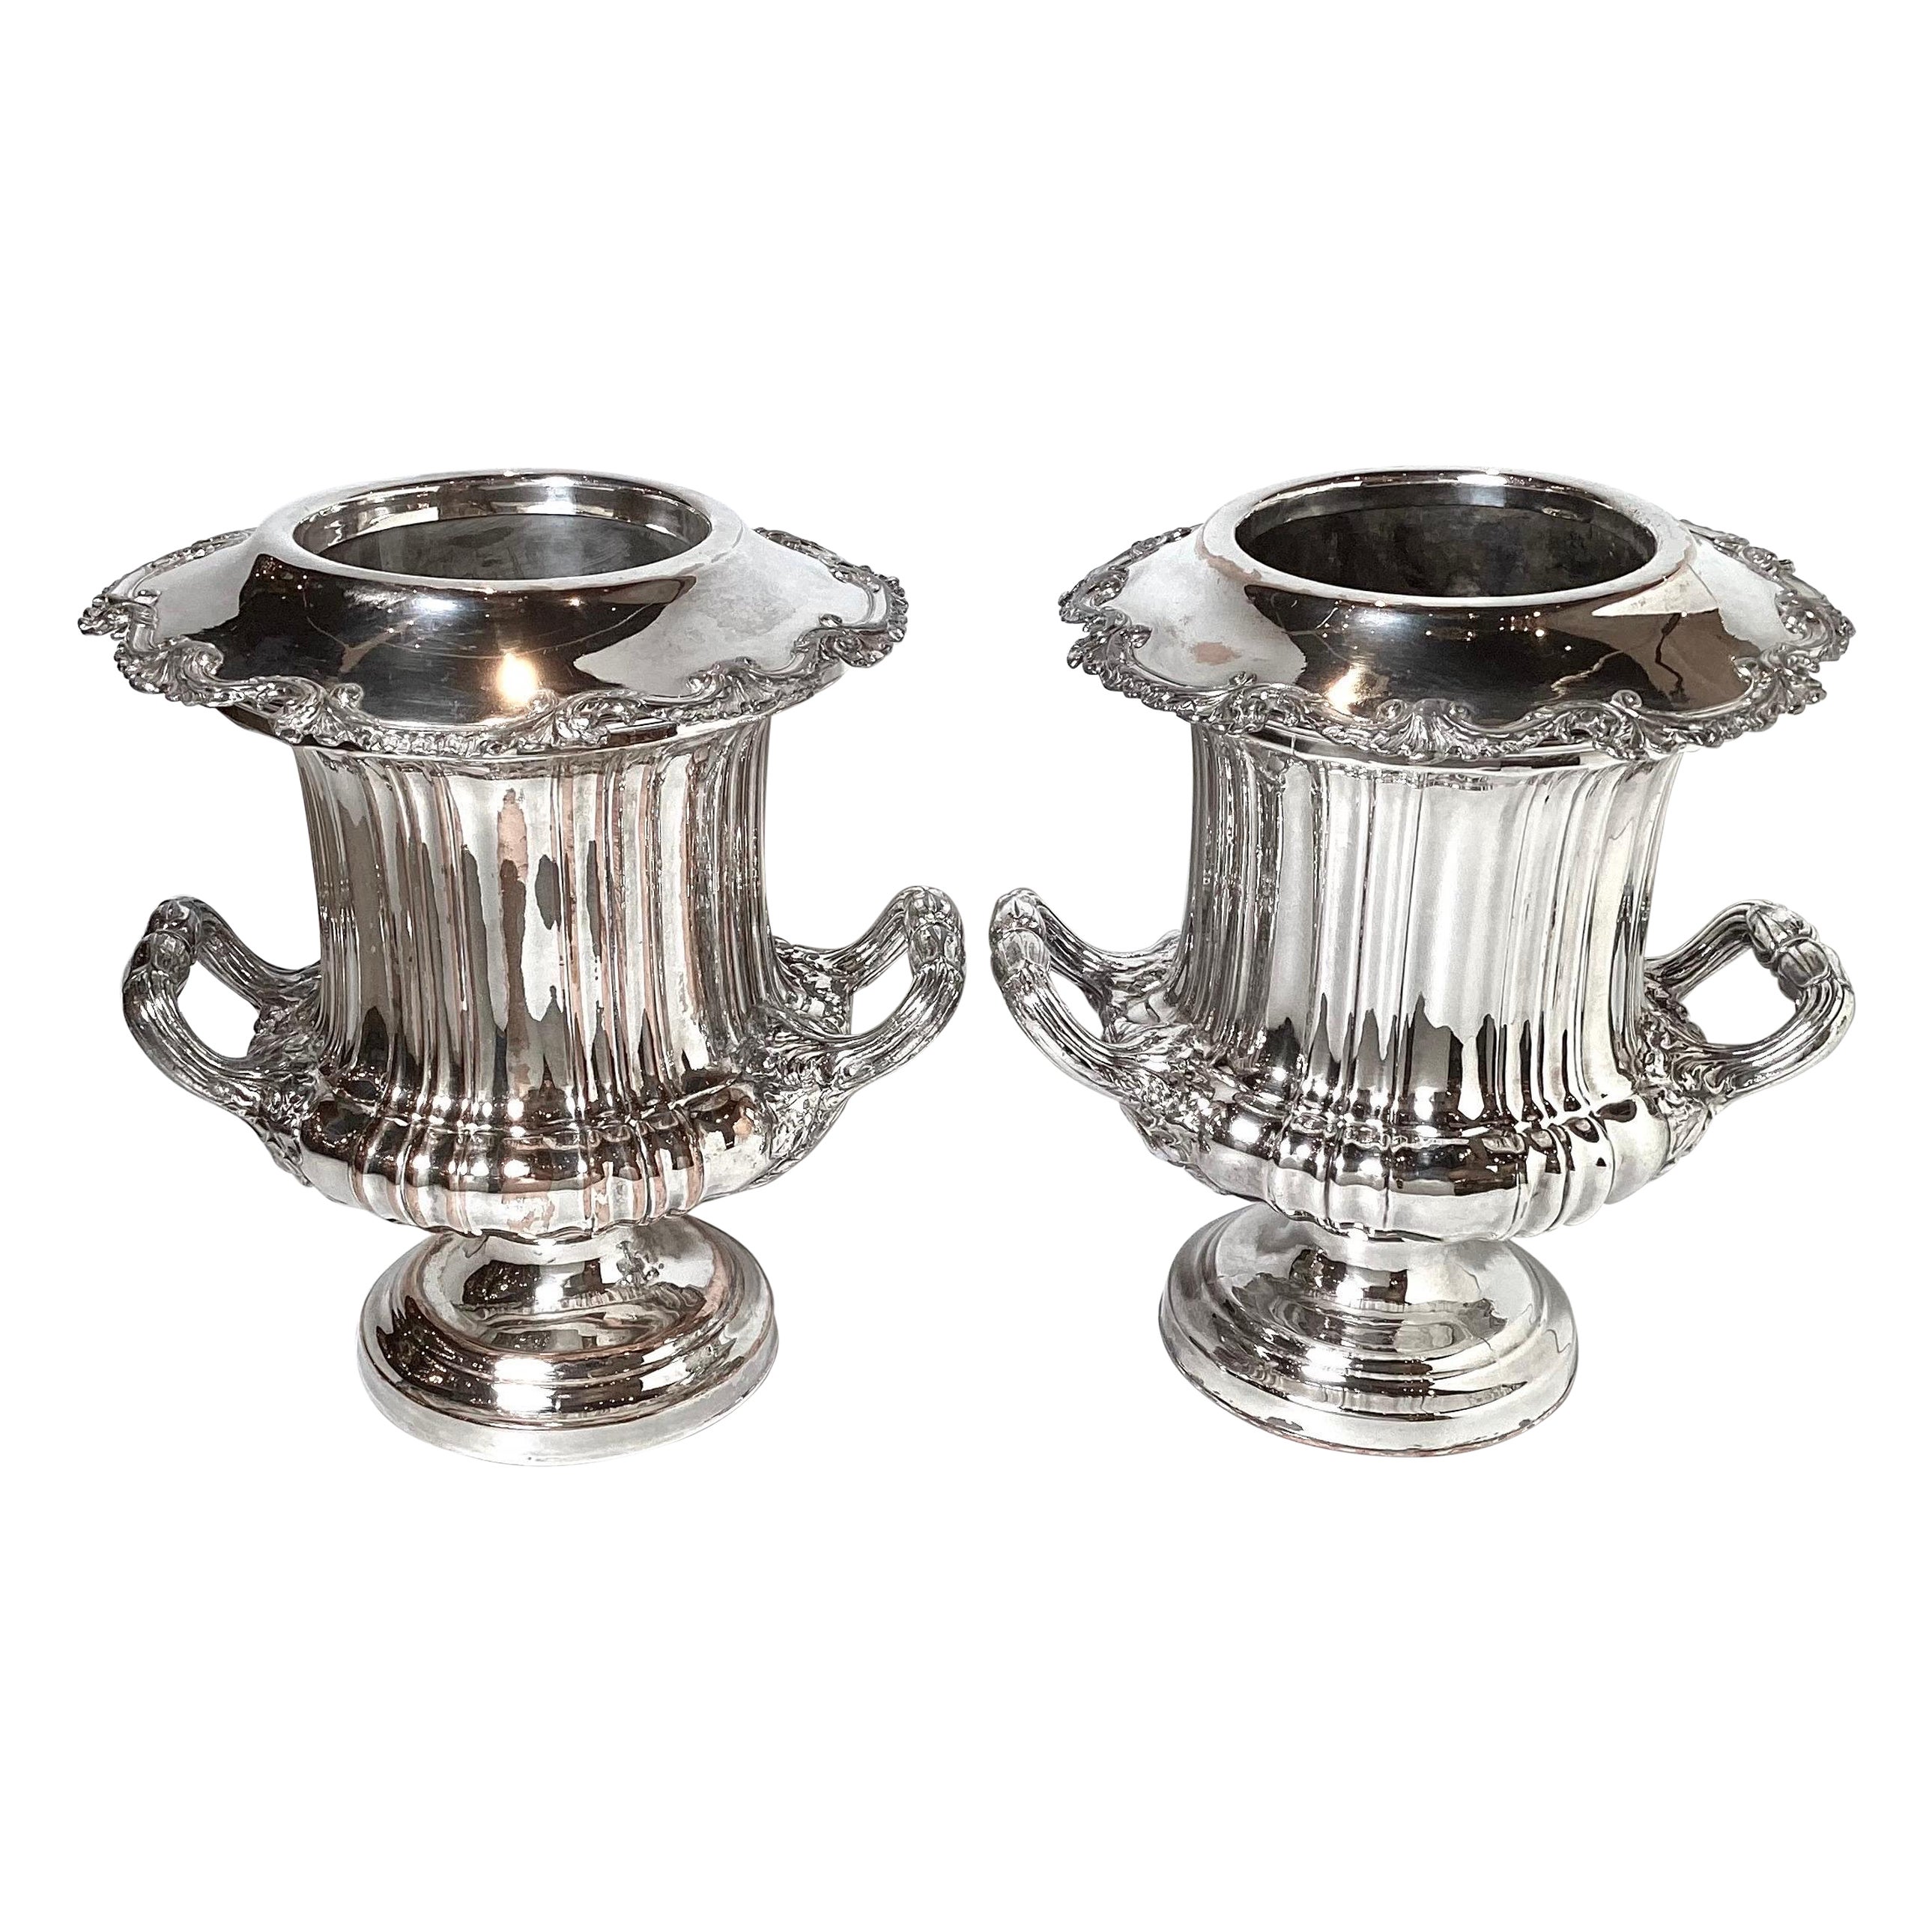 Pair of Silver Plated Copper Campana Urn Champaigne Coolers For Sale